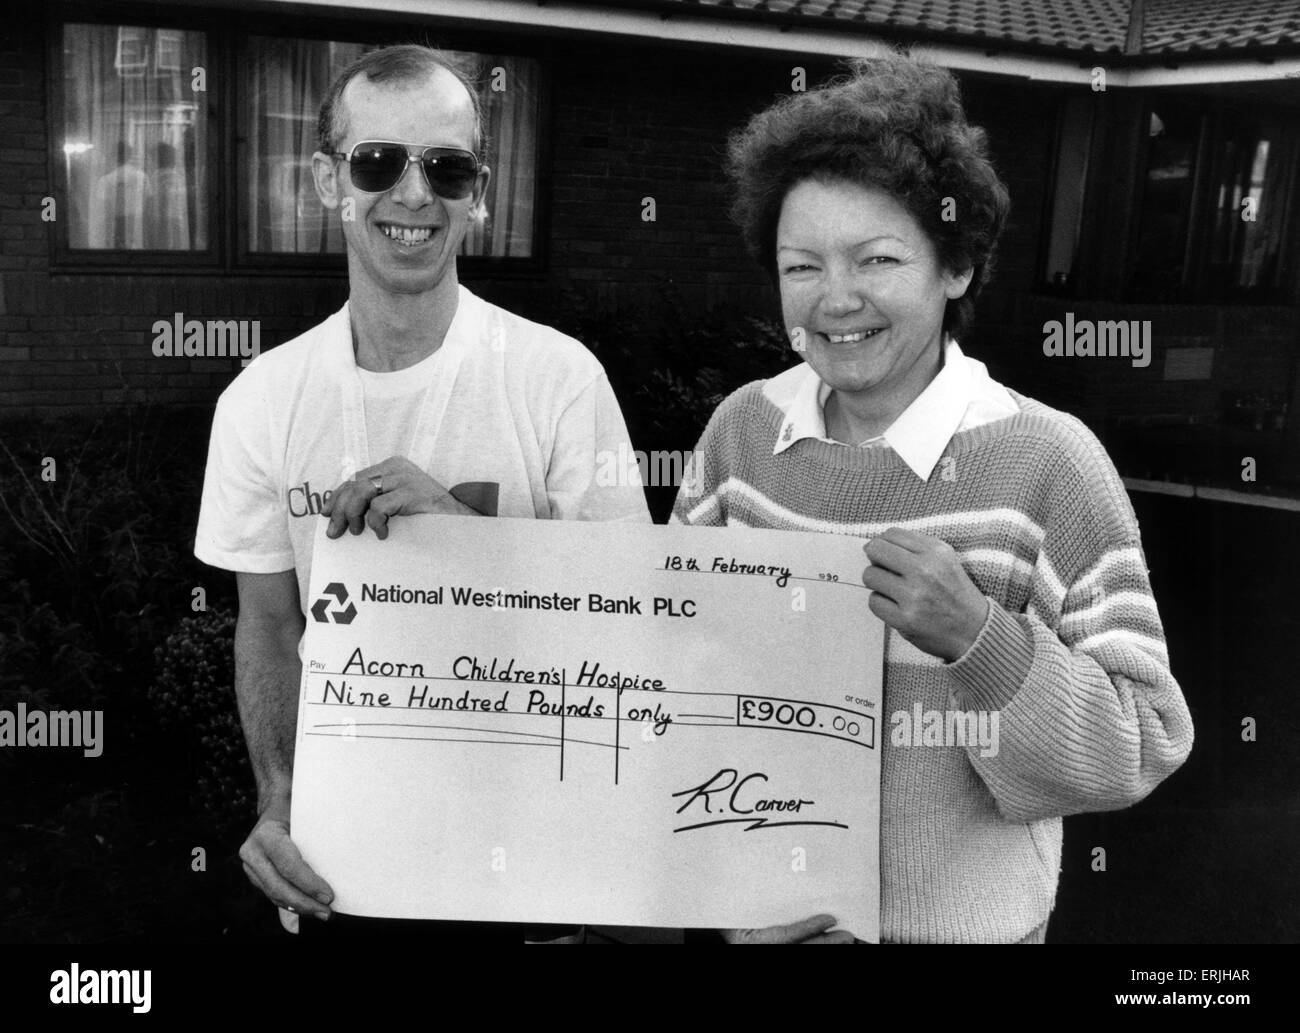 Ray Carver hands over a cheque for £900 to Sally Day, Director Acorns Children's Hospice, Oak Tree Lane, Selly Oak, Birmingham. 18th February 1990. Money raised in the Vax Marathon. Stock Photo